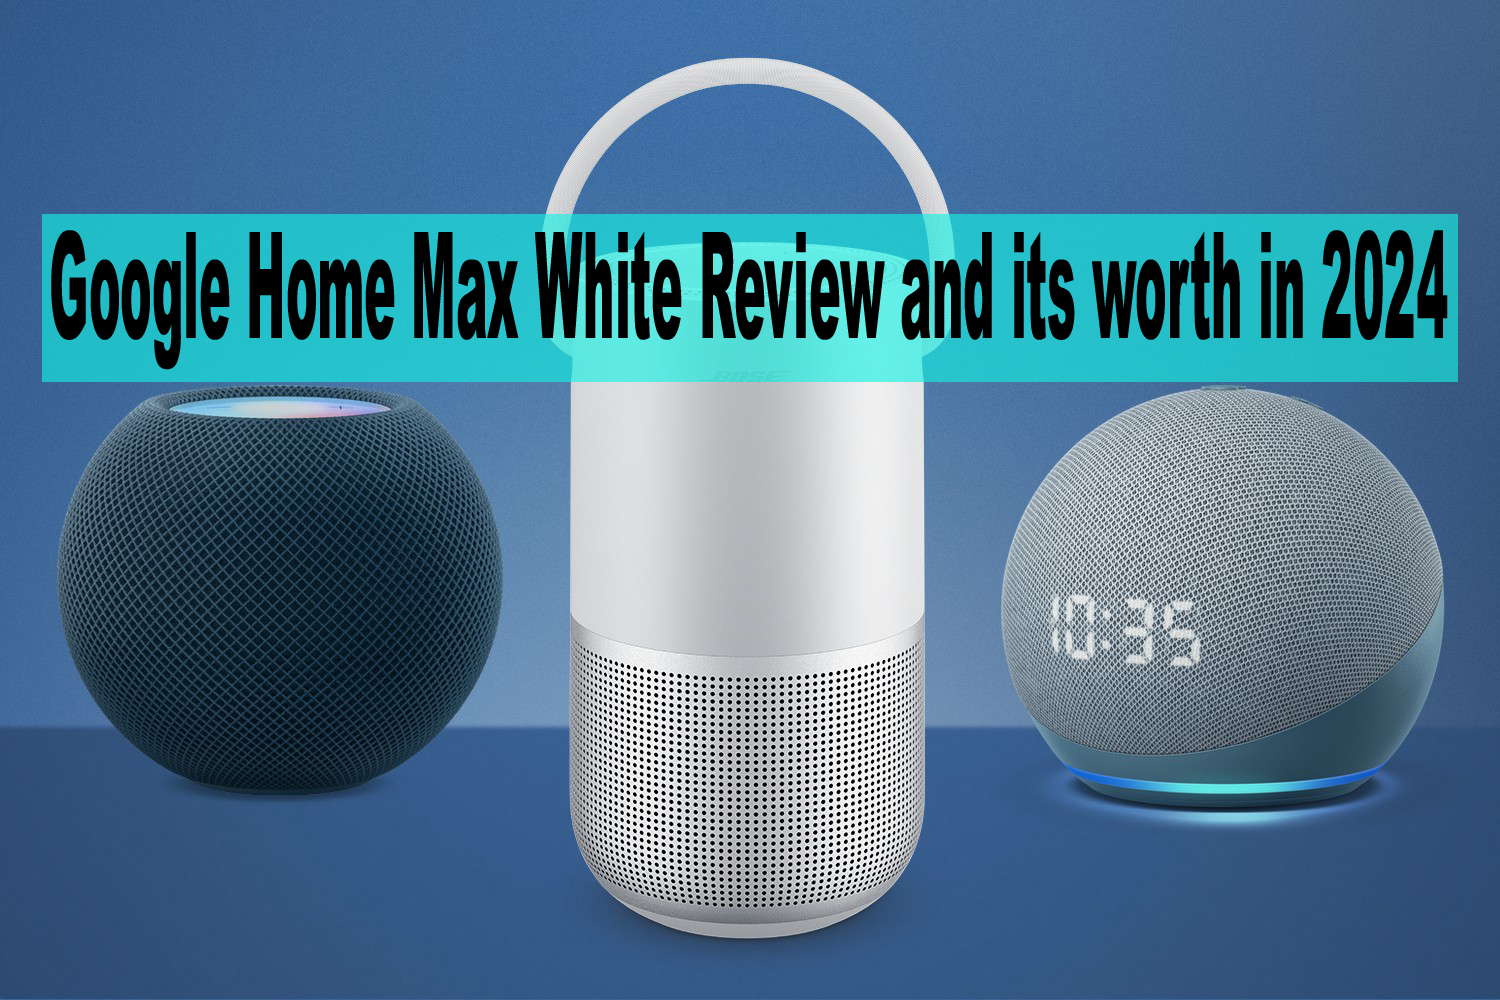 Google Home Max White Review and its worth in 2024